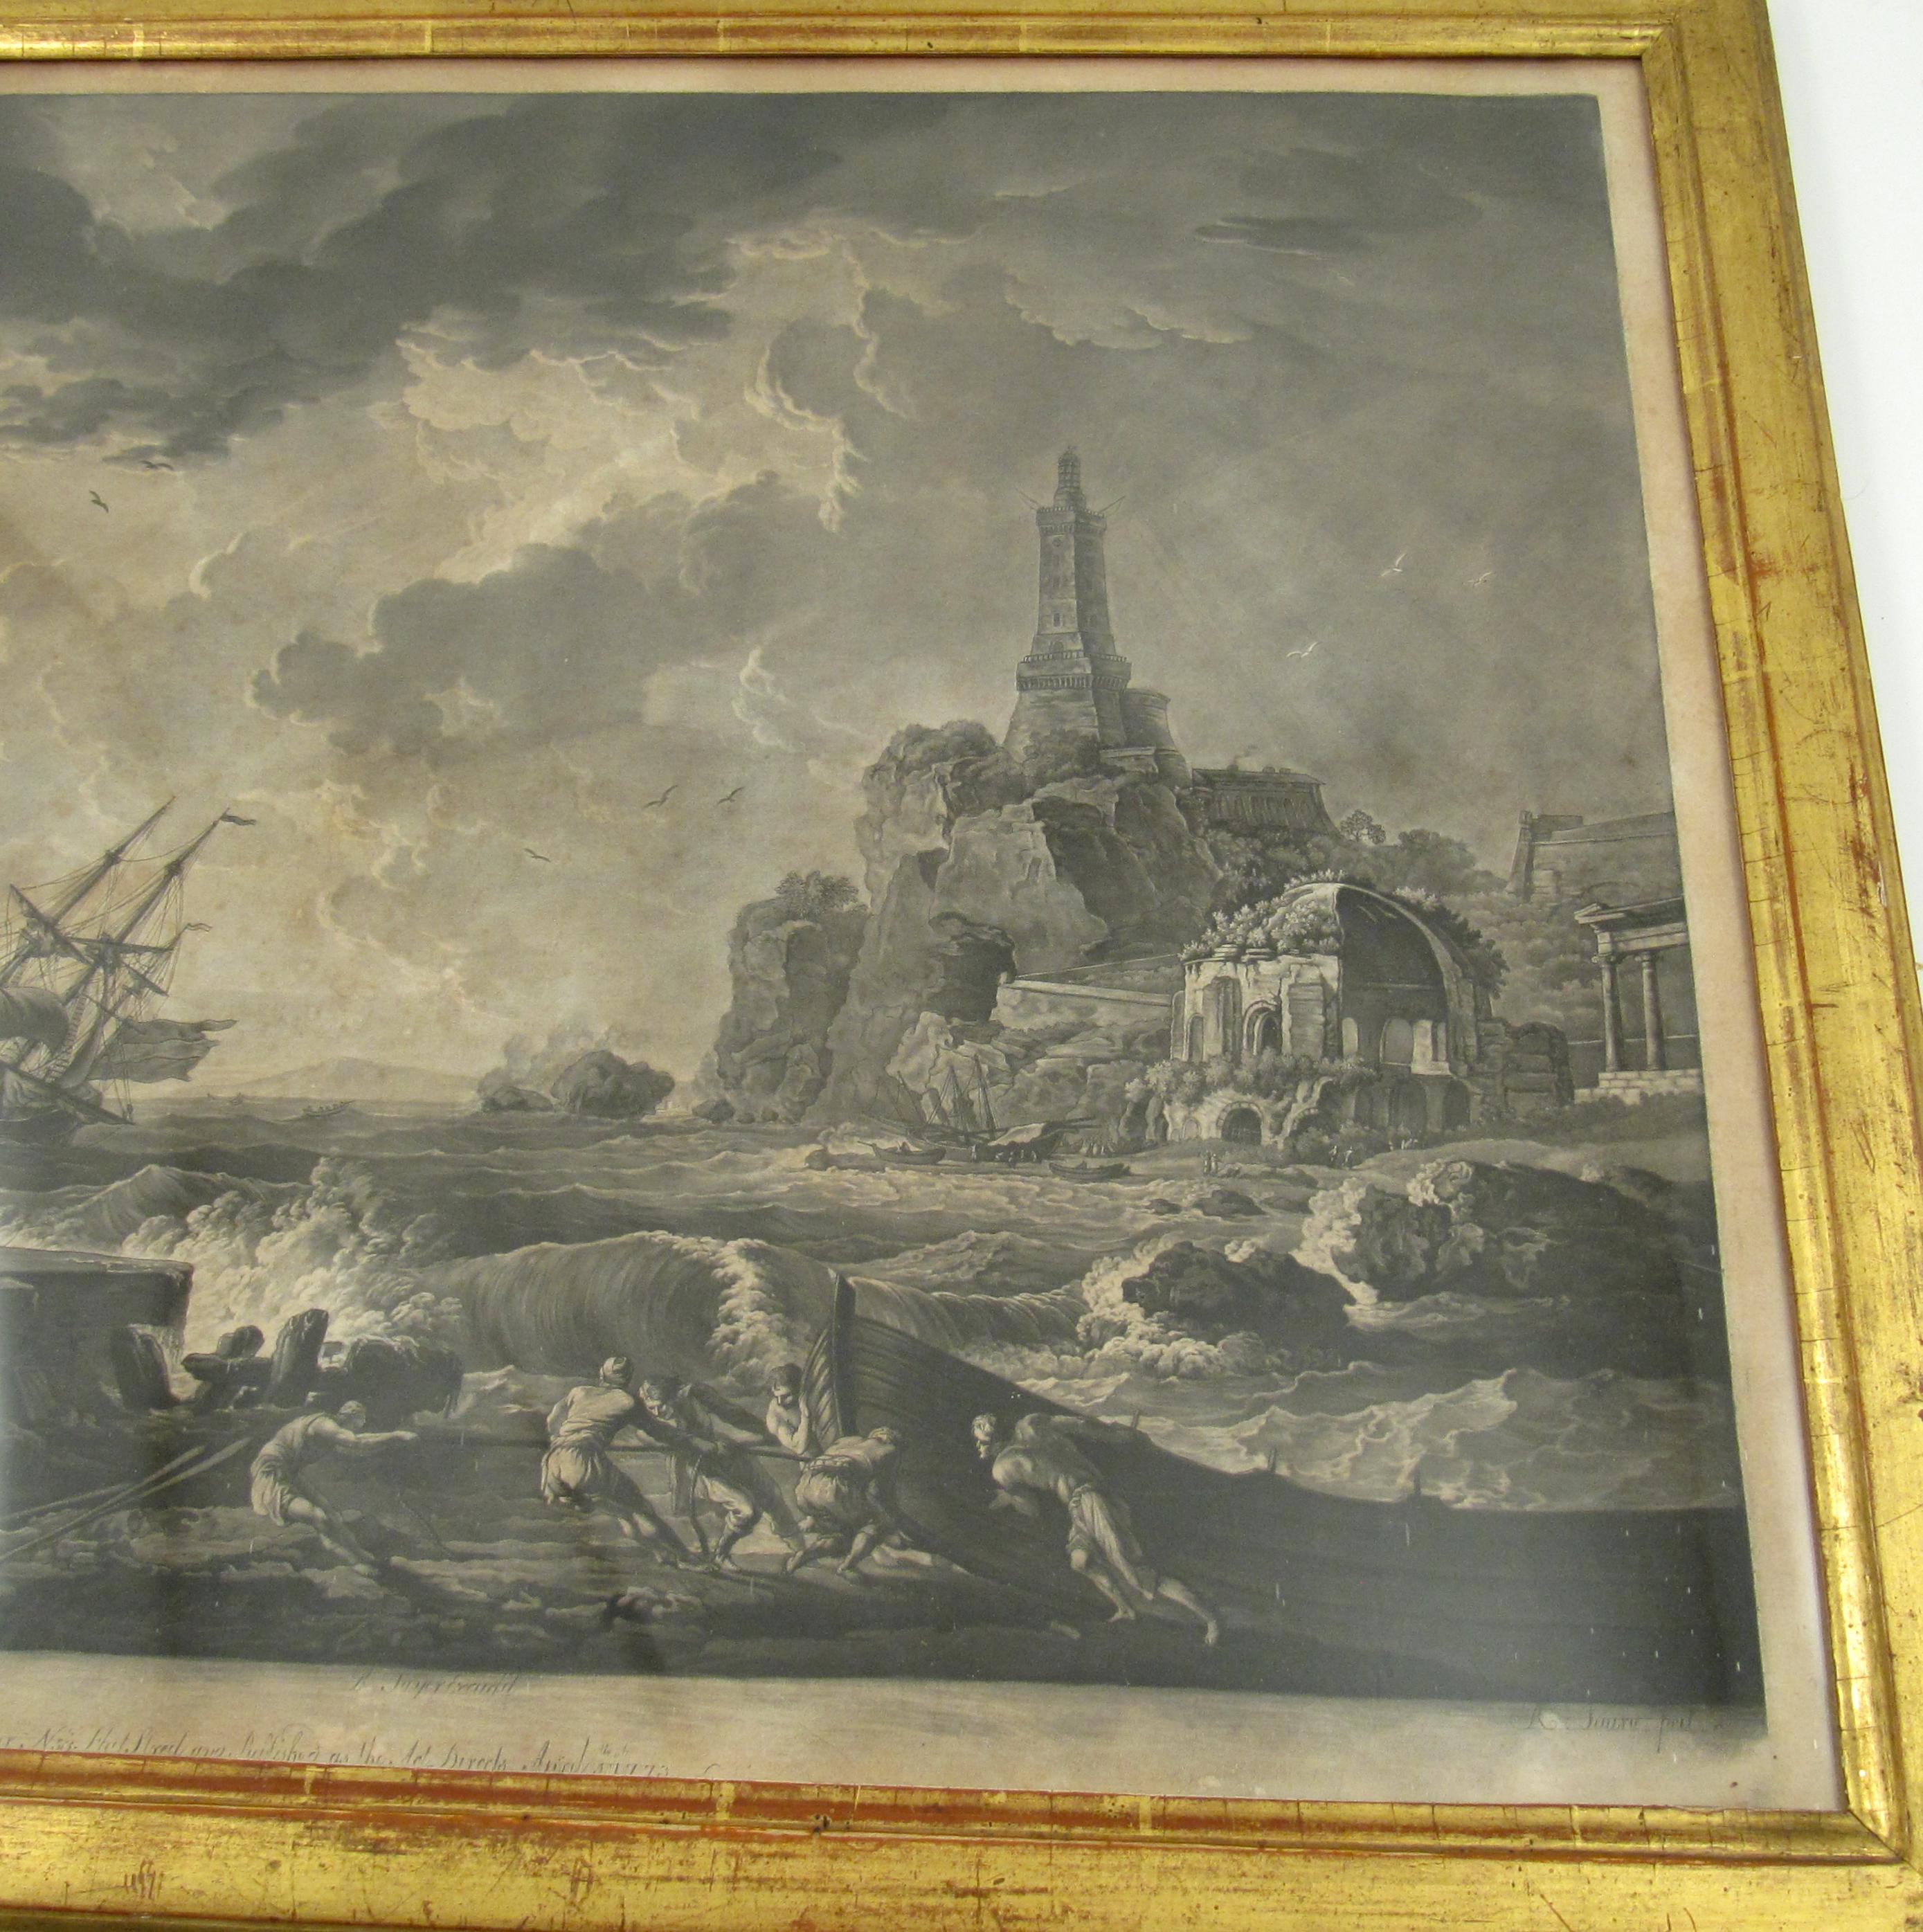 Costal Harbour Landscape with a Ship and brewing Storm - 18th Century Engraving - Naturalistic Print by Claude-Joseph Vernet